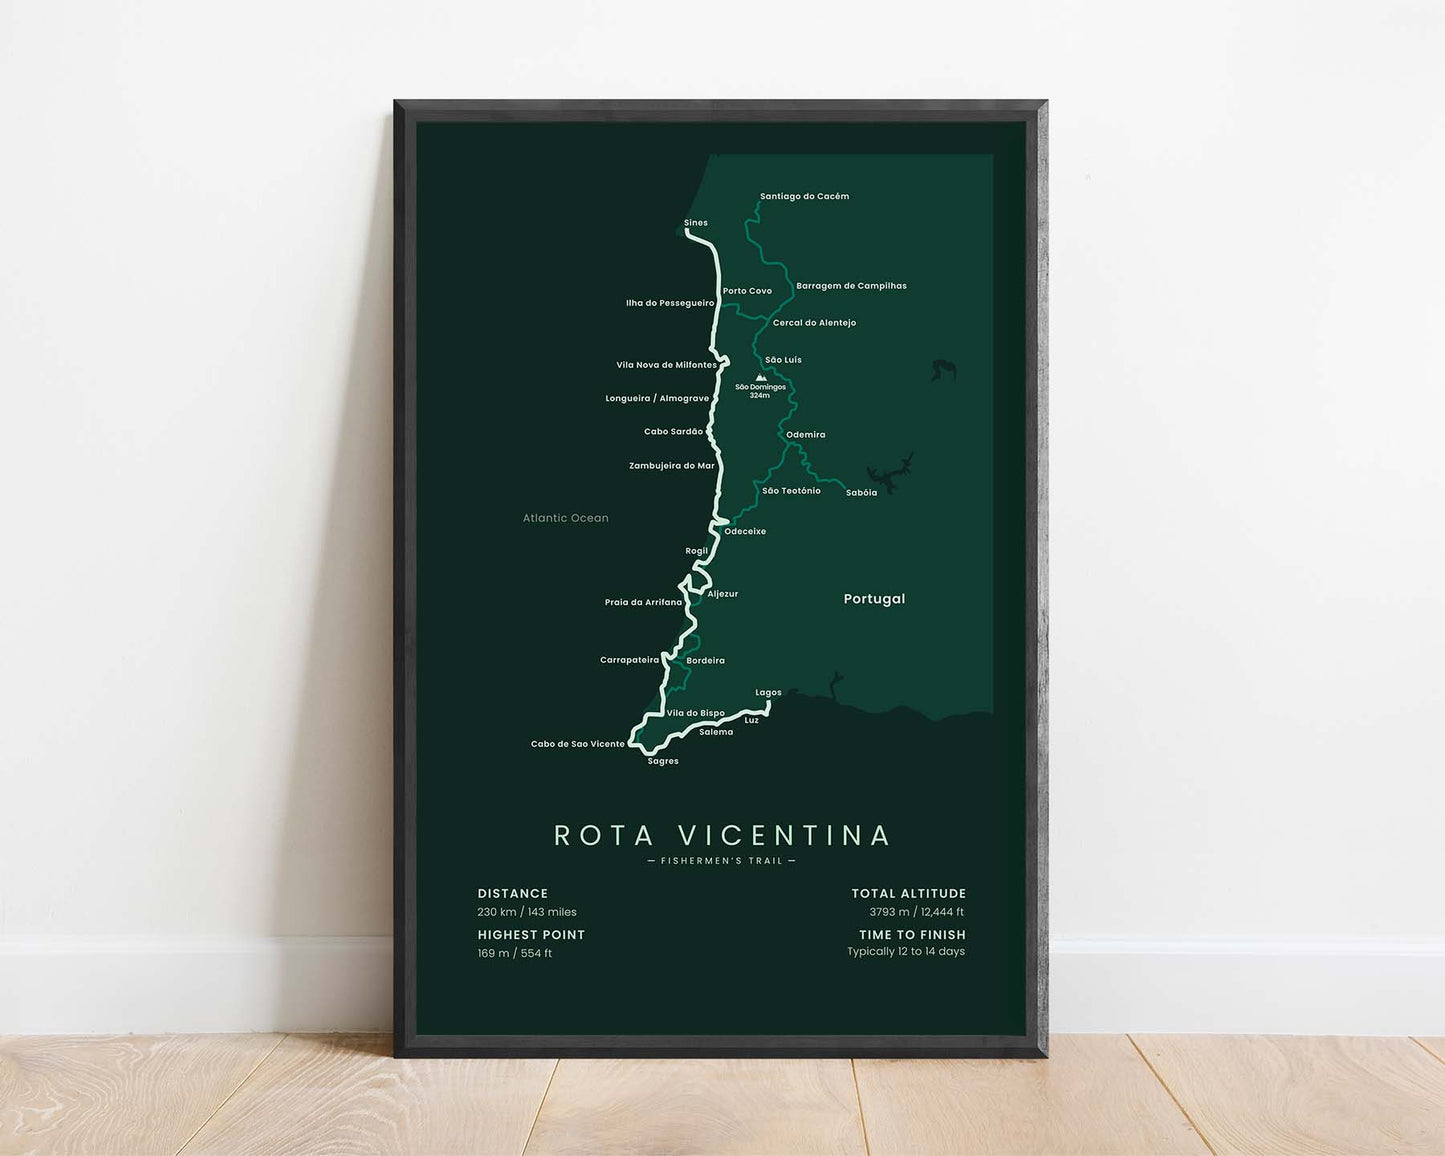 Rota Vicentina Fishermen's Trail (Lagos) Track Map Art with Green Background